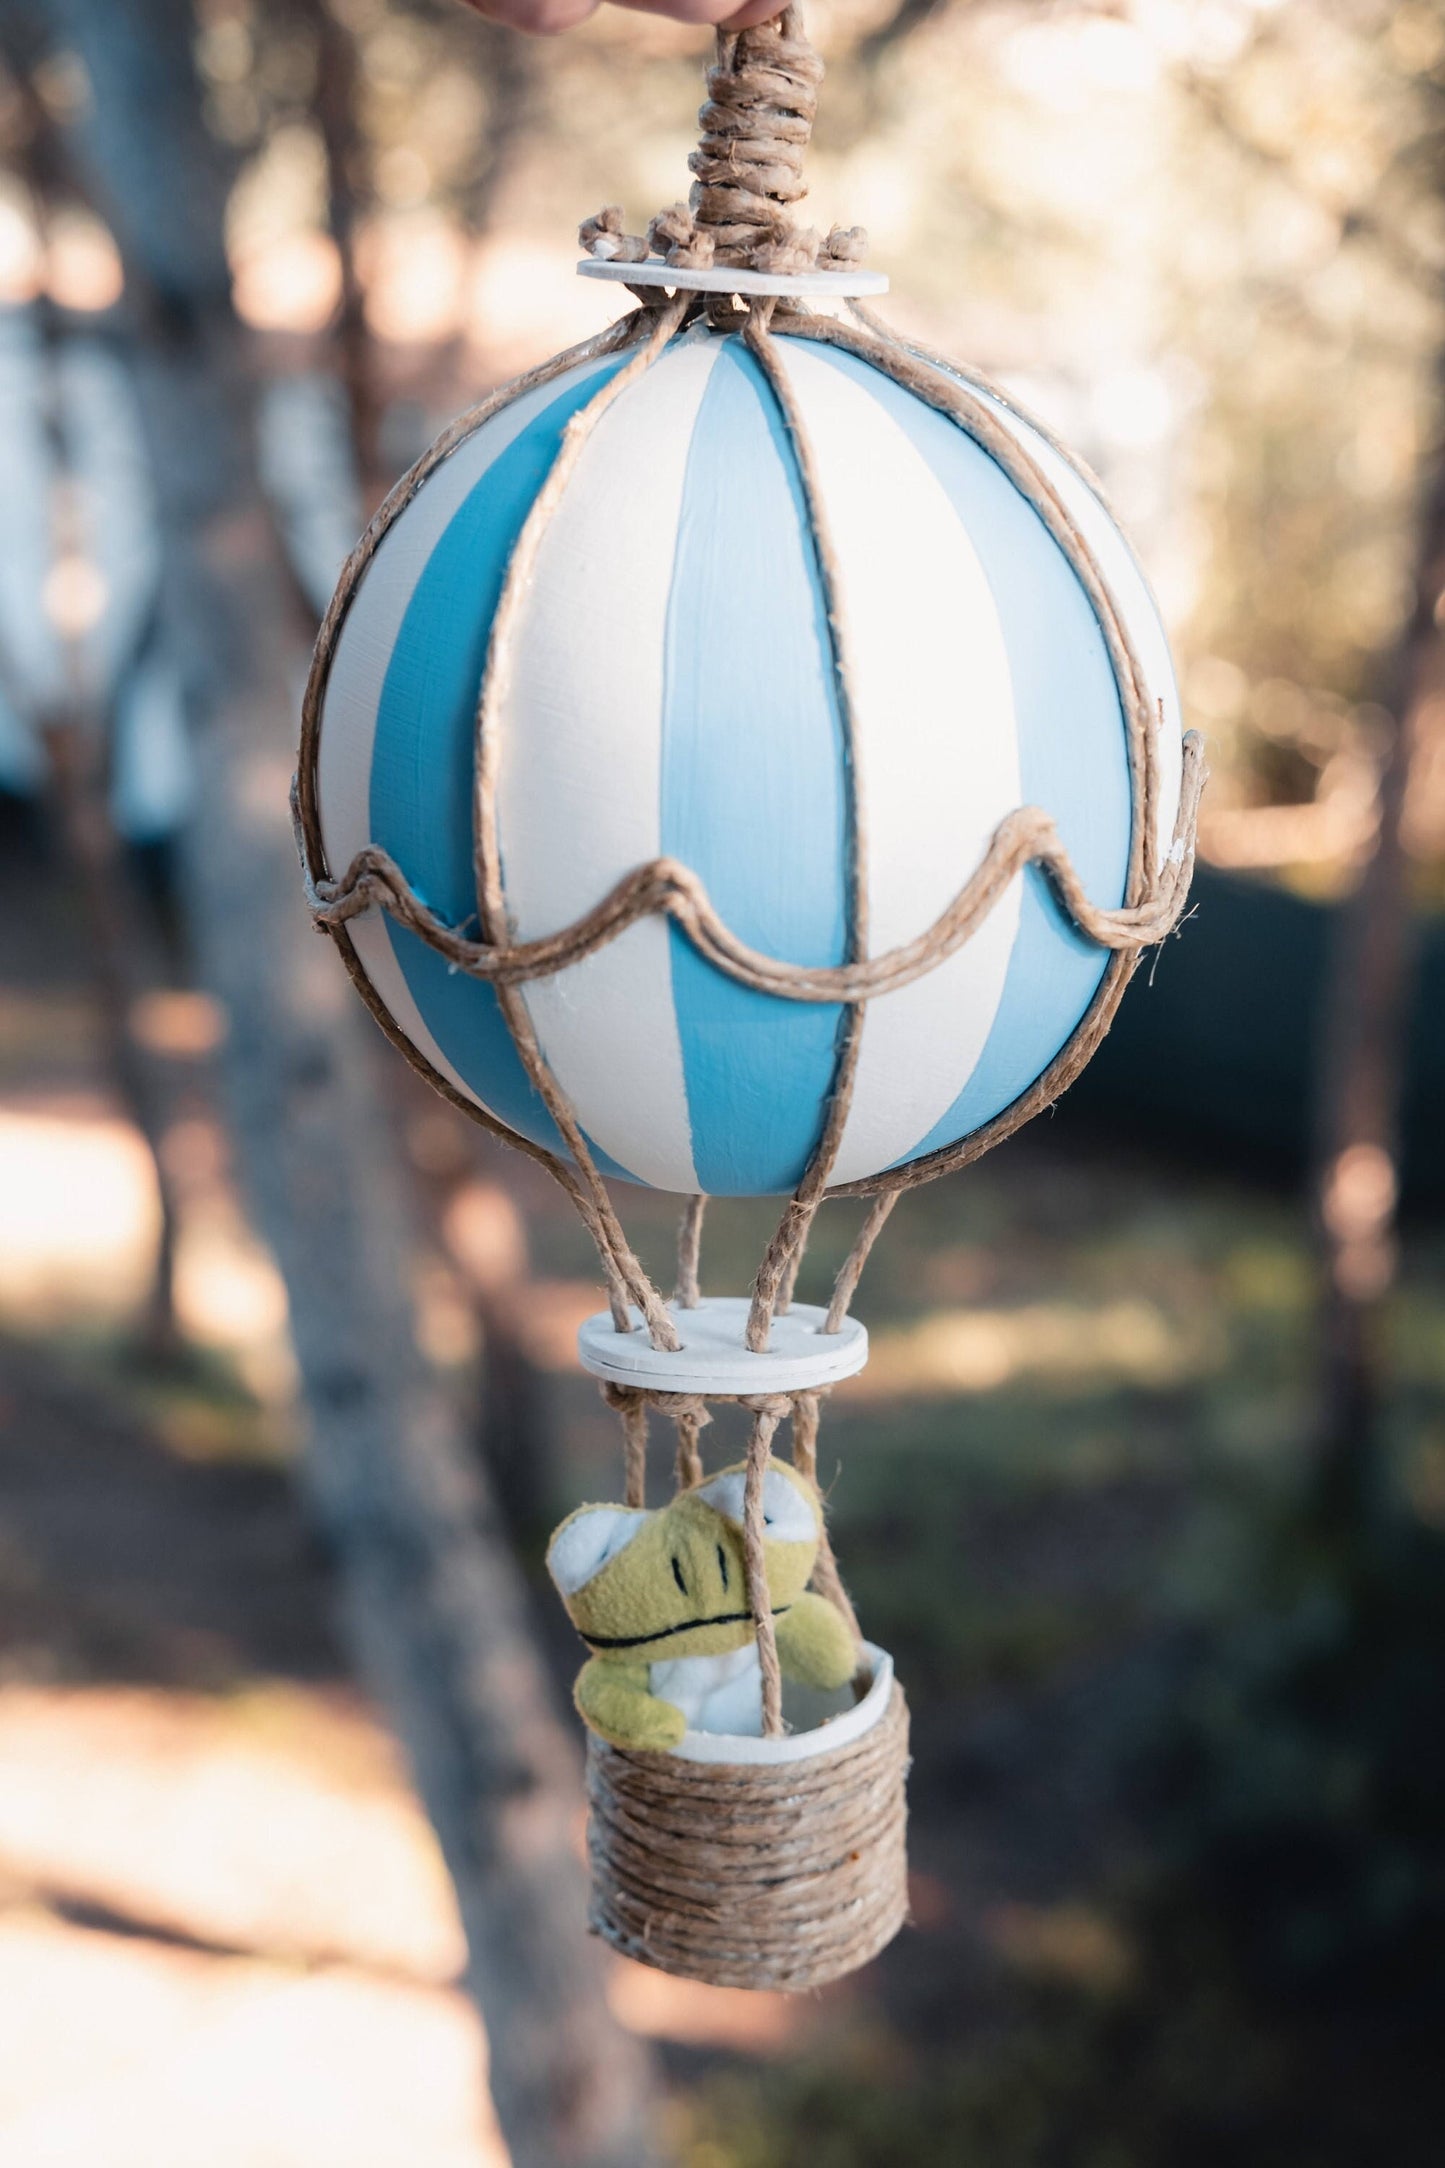 Hot air balloon Hand made in Italy in Paper Mache, Gold Leaf For decorations - Home Decor For Tracy